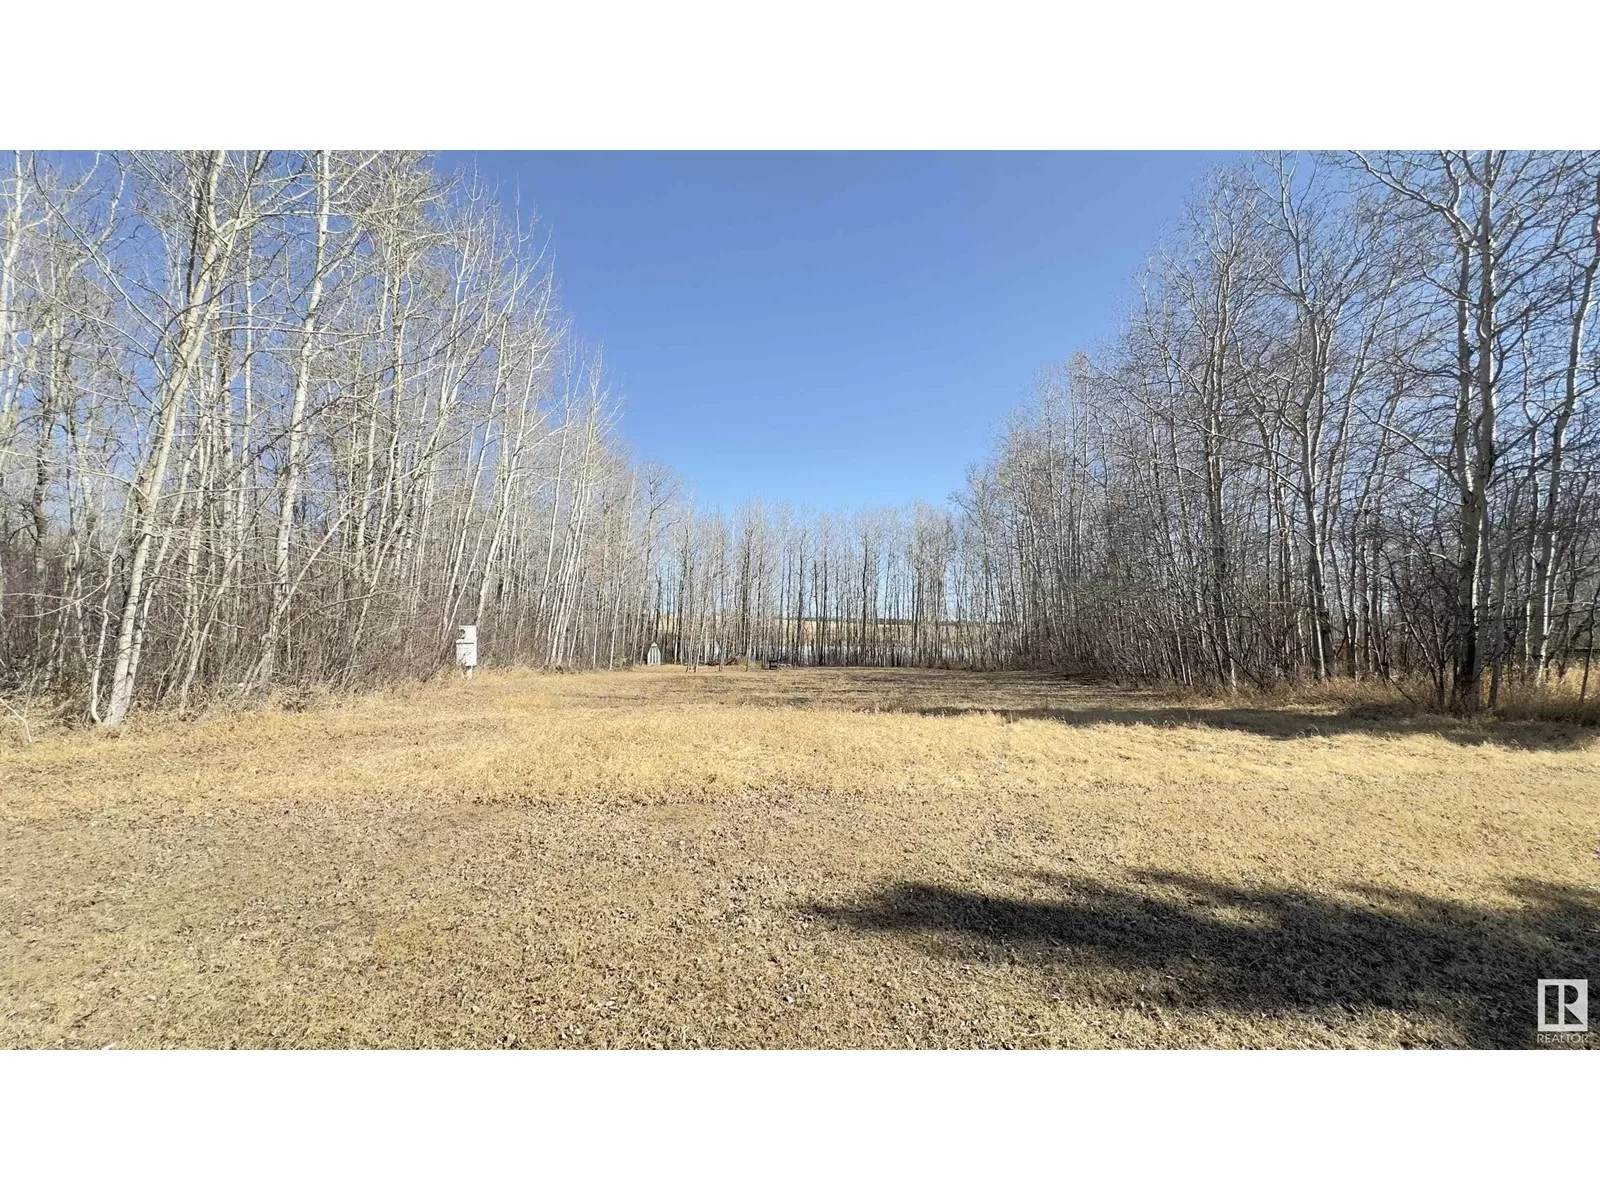 No Building for rent: Hwy 2 Twp Road 670, Rural Athabasca County, Alberta T9S 1A0